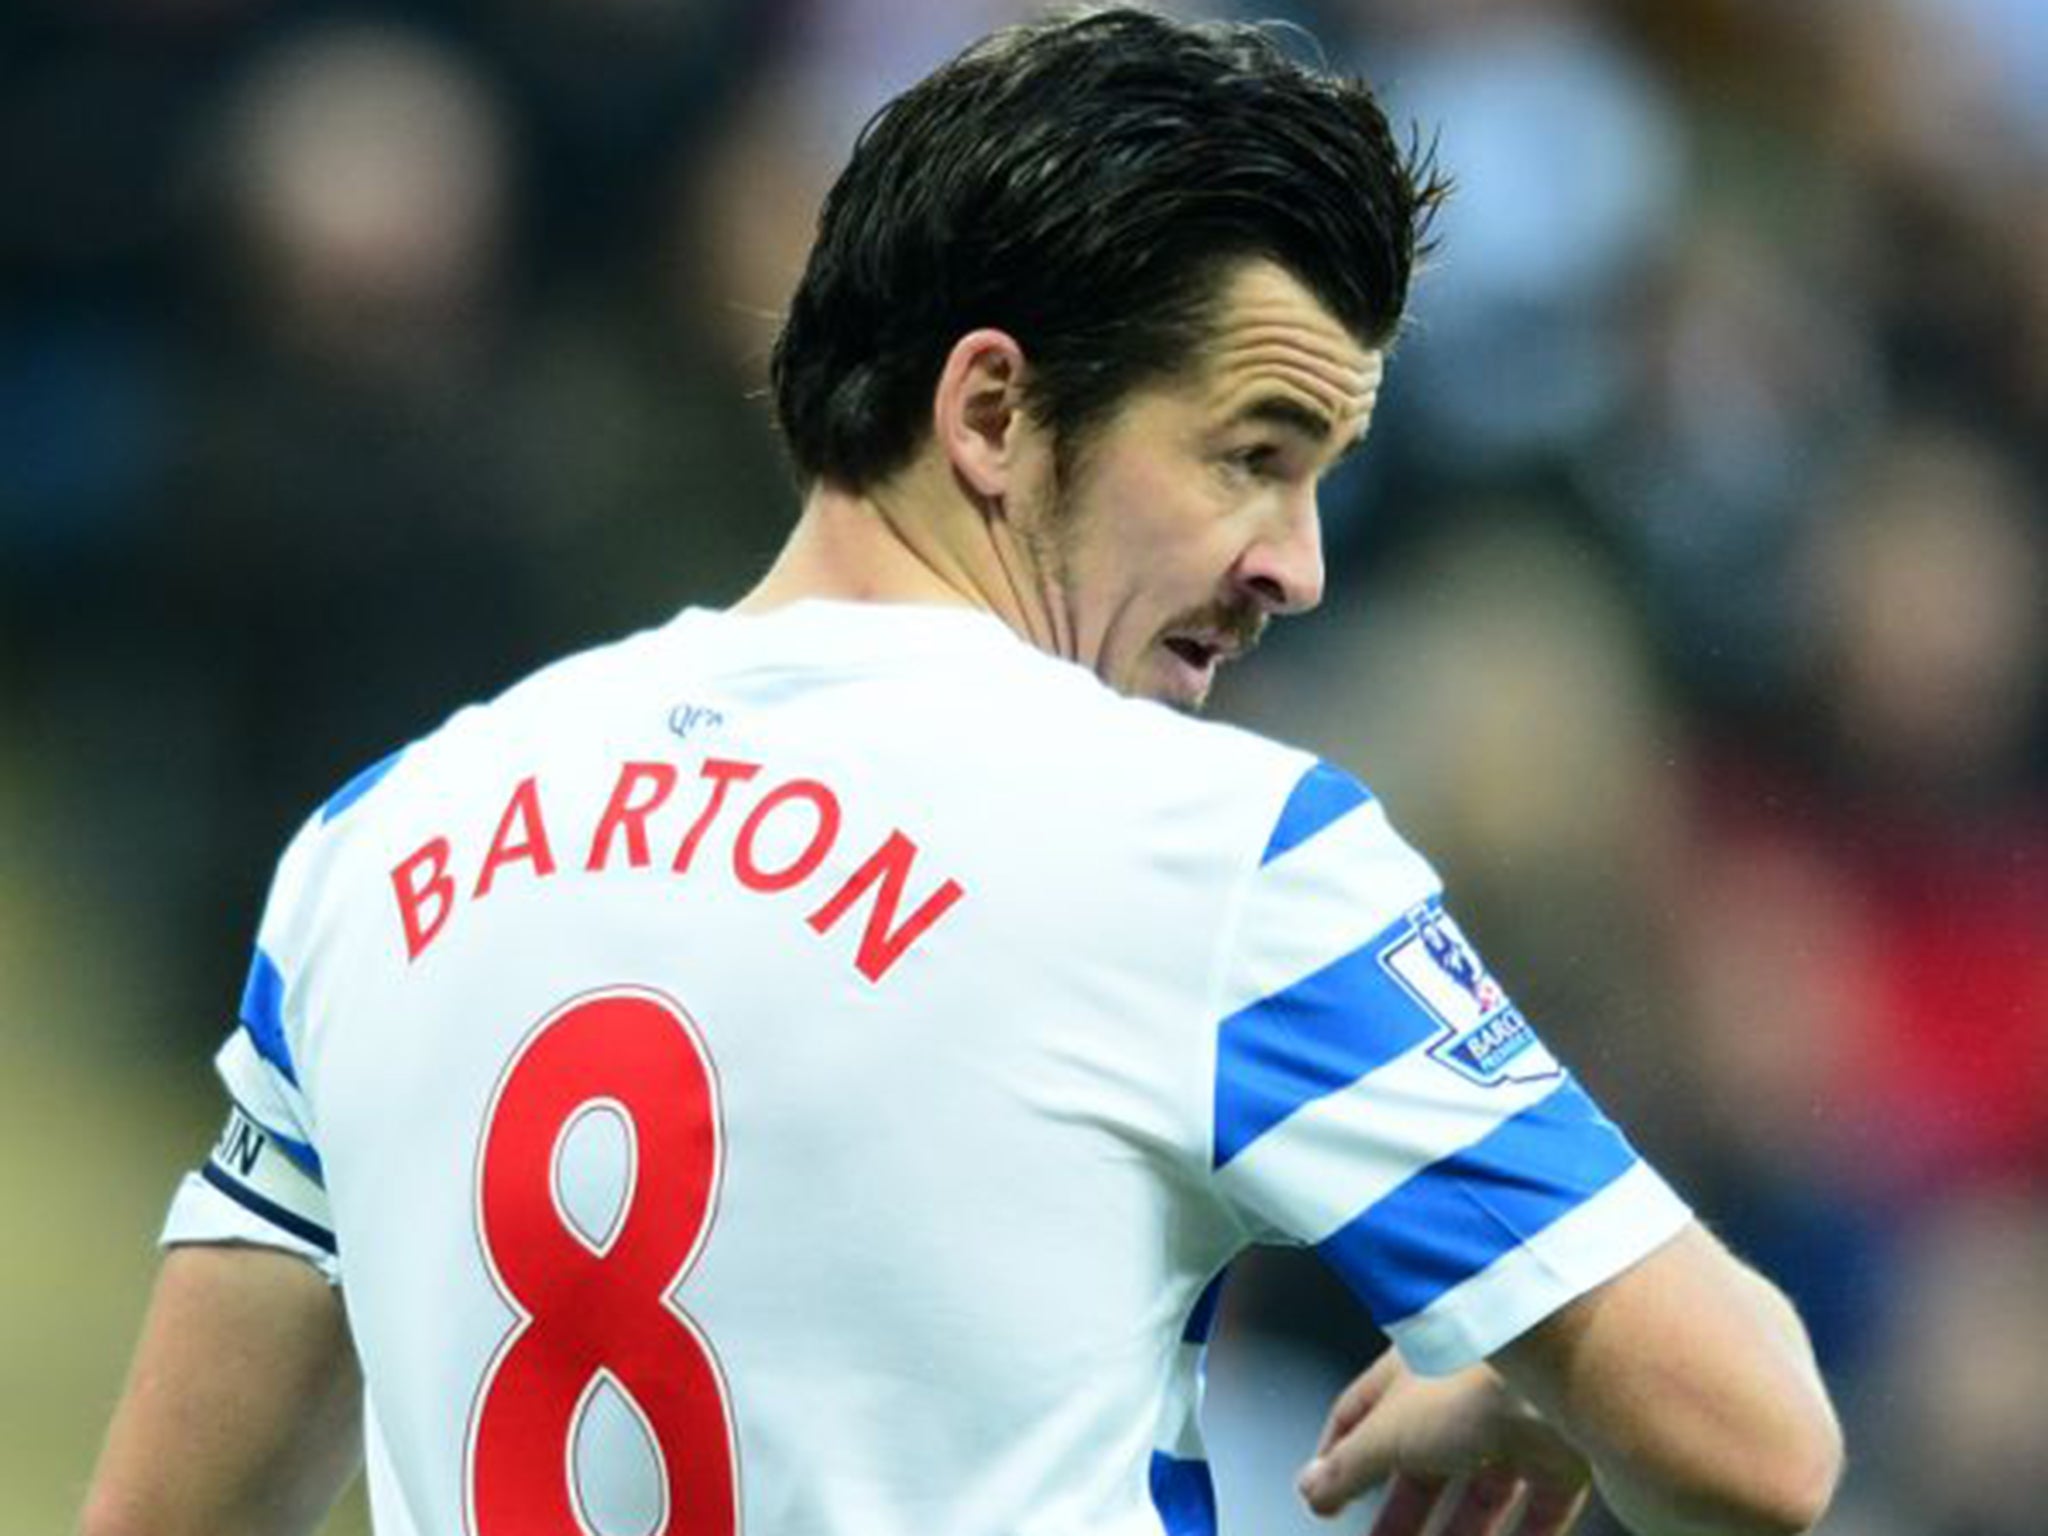 Joey Barton: "Let’s not waste money on religion" (Getty)